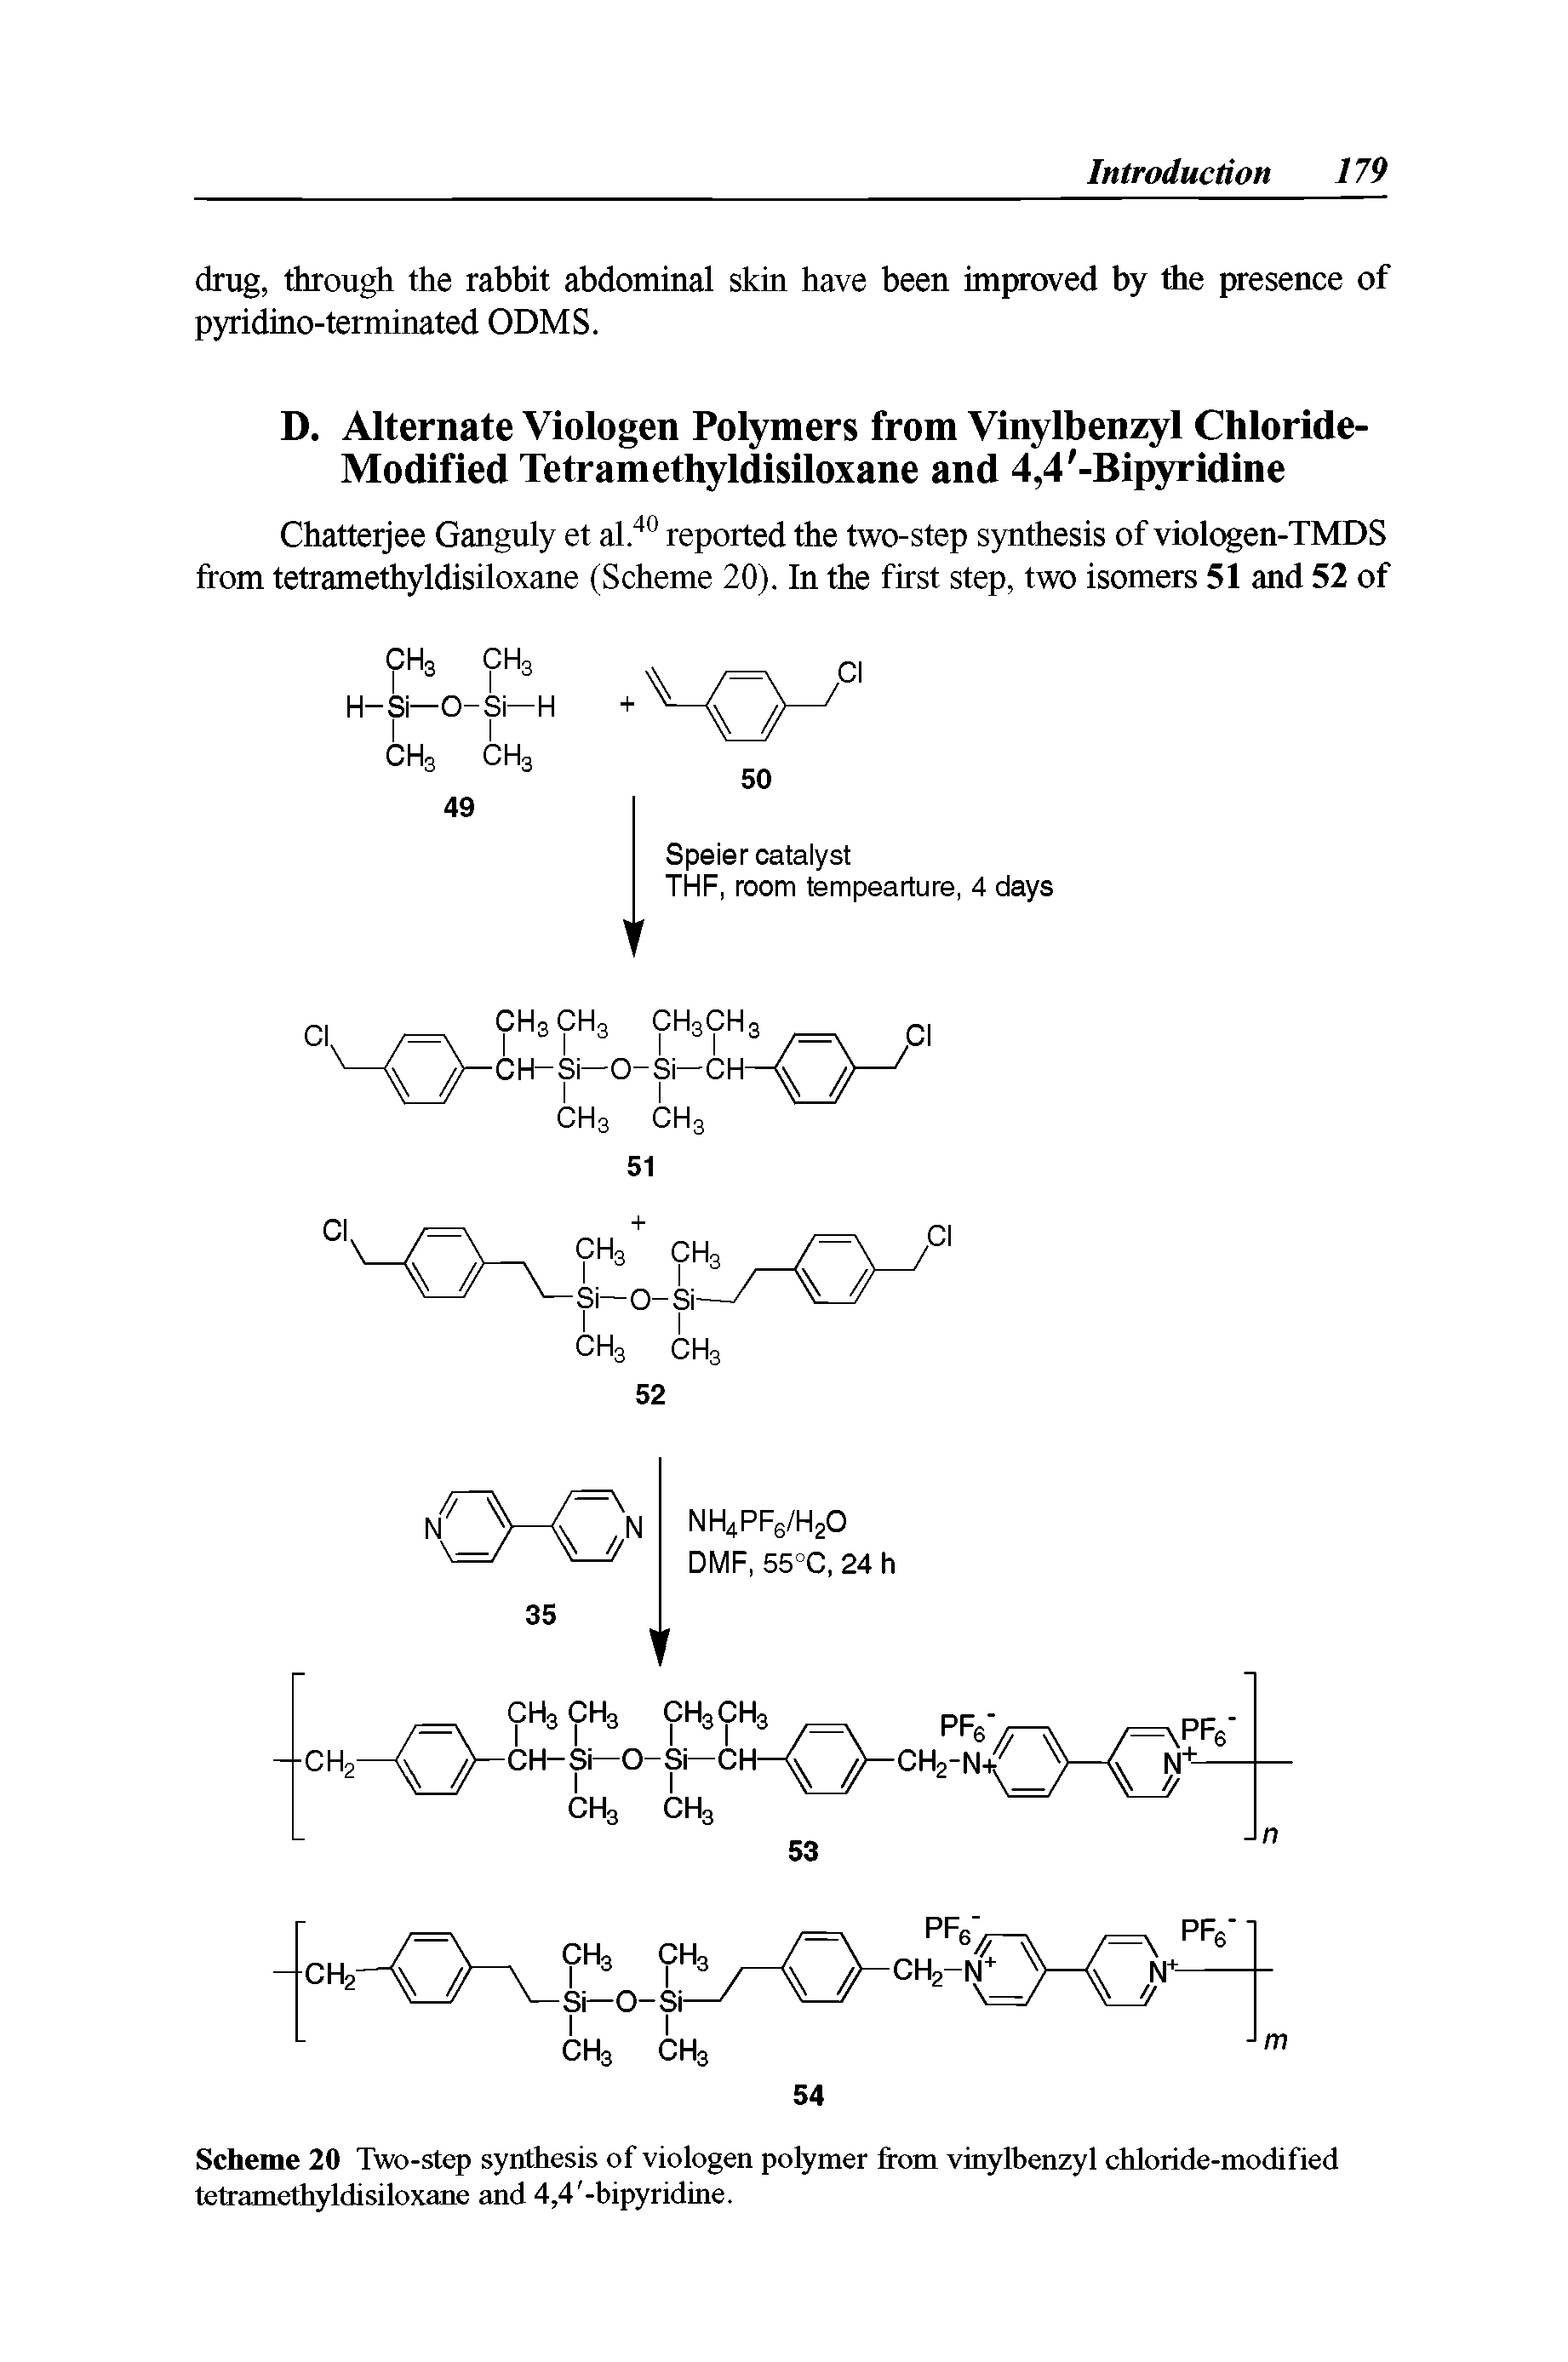 Scheme 20 Two-step synthesis of viologen polymer from vinylbenzyl chloride-modified tetramethyldisiloxane and 4,4 -bipyridine.